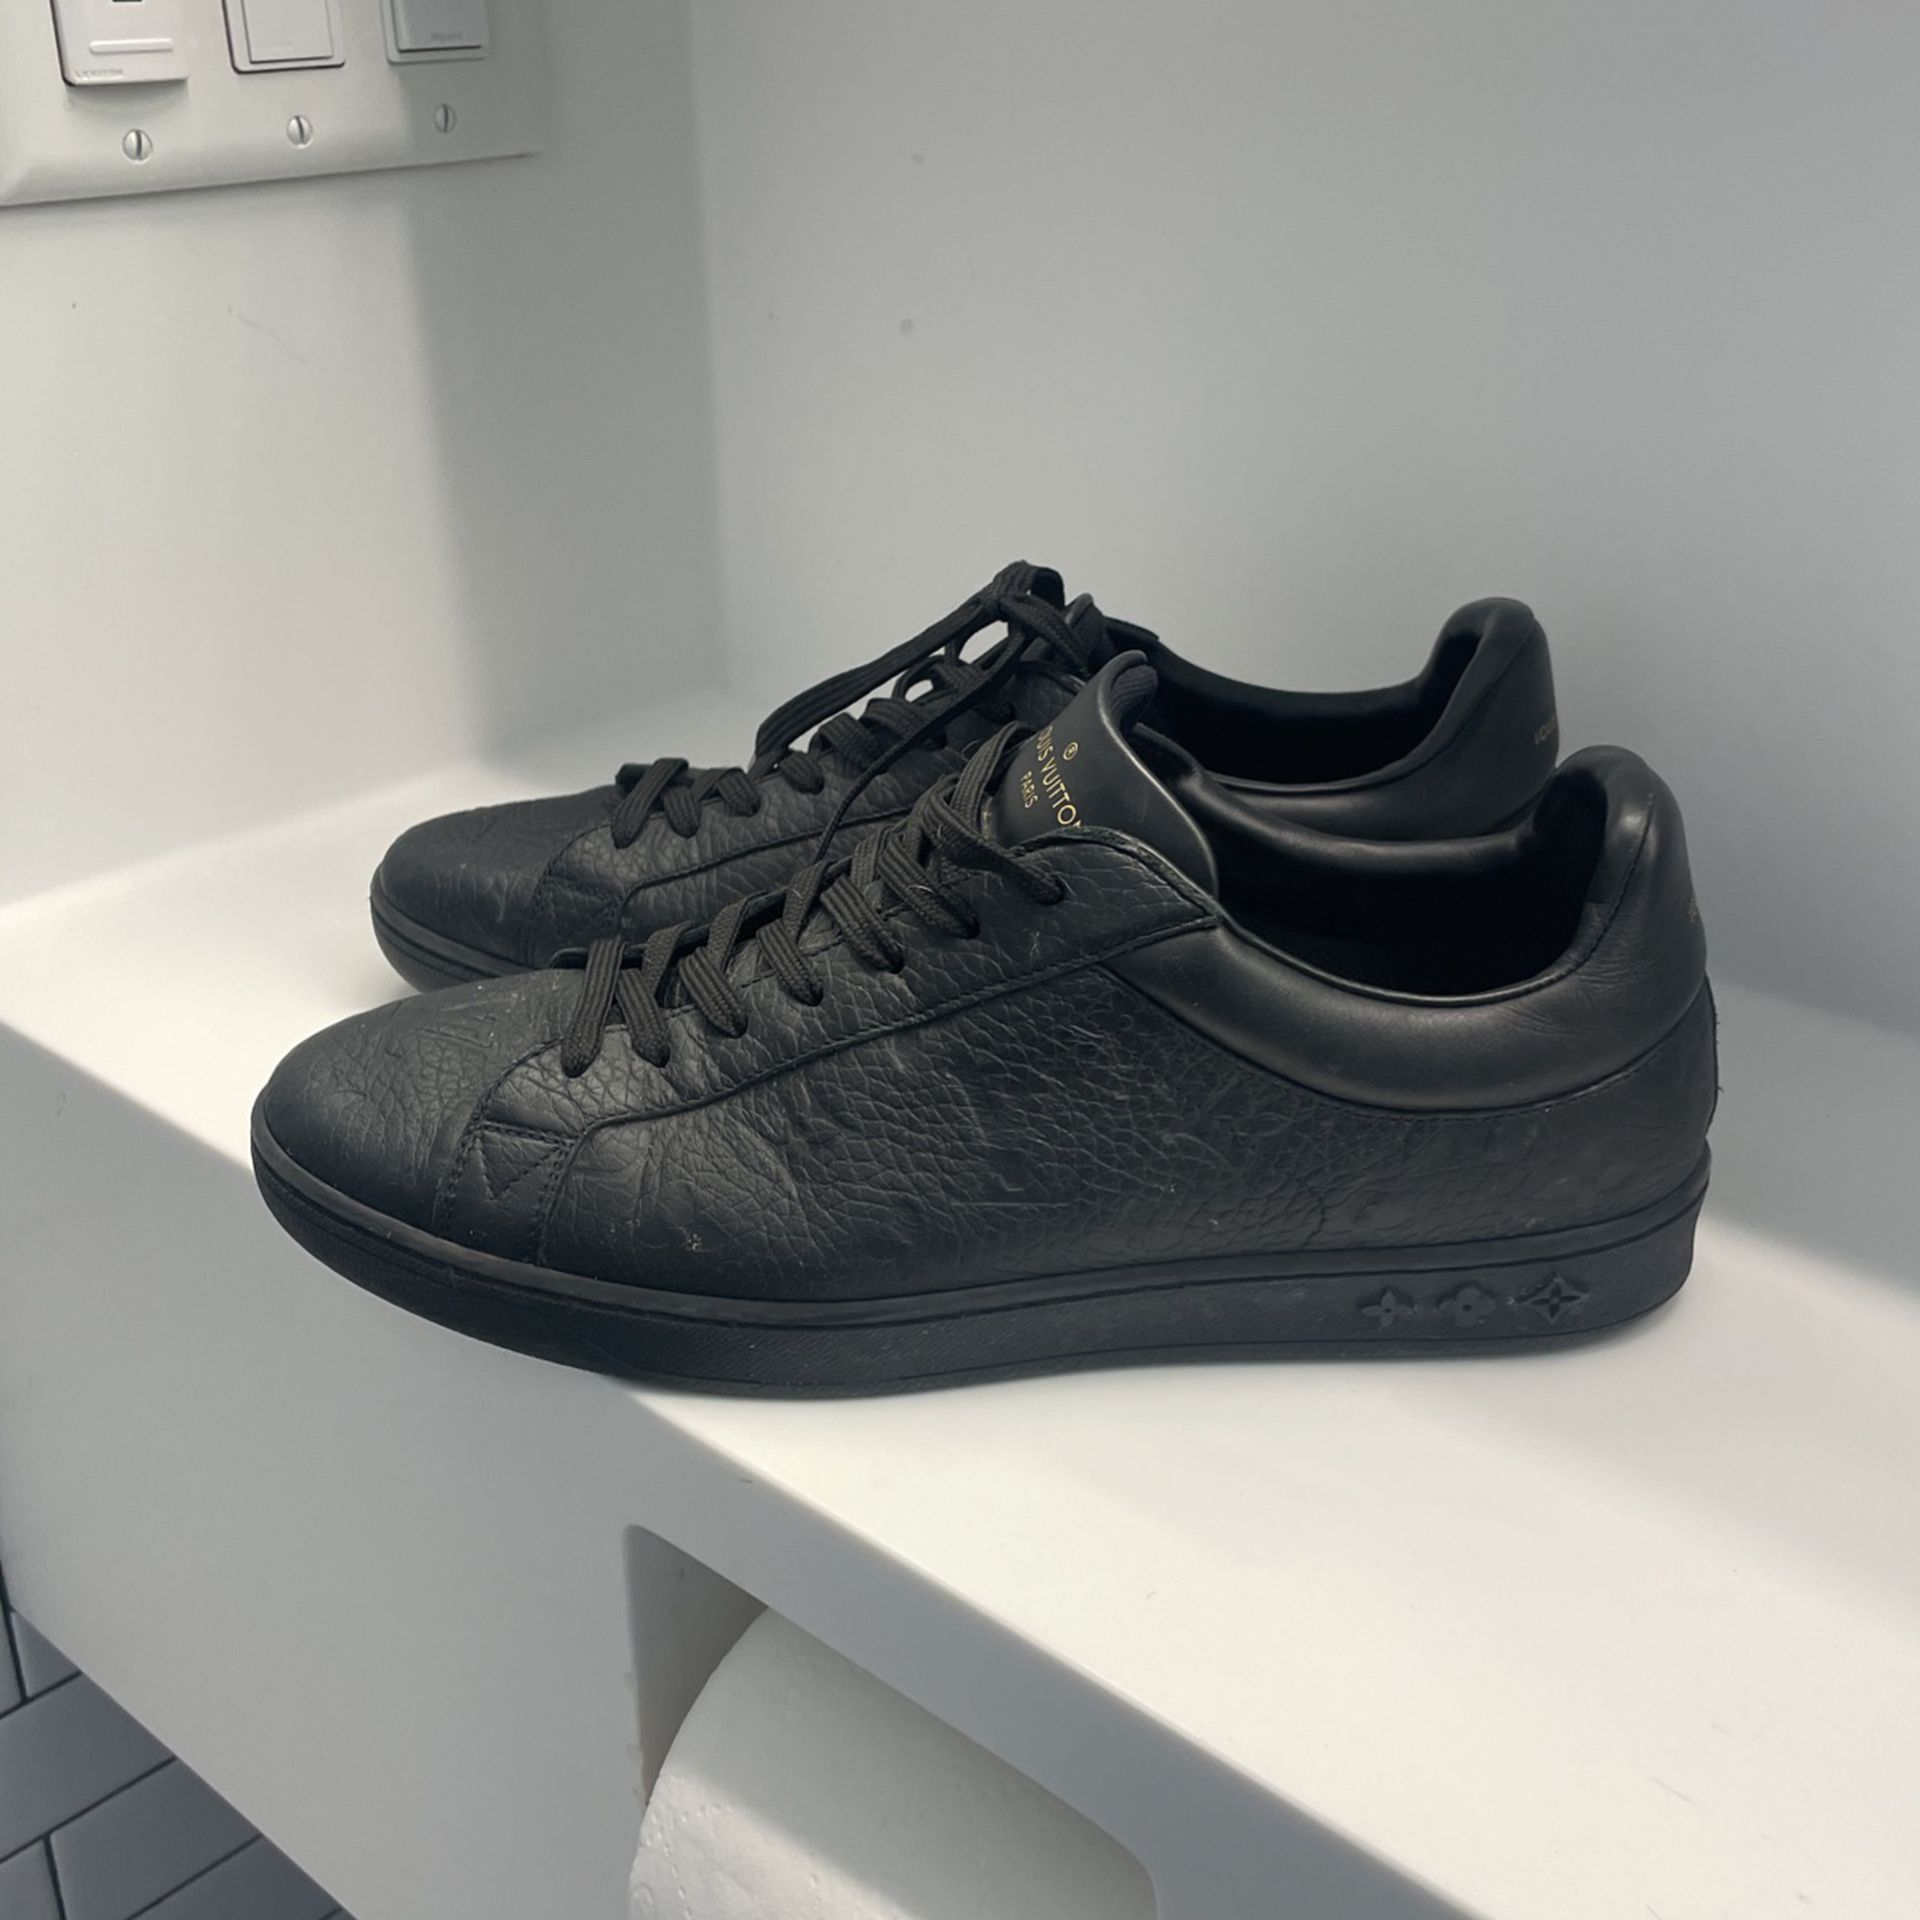 Louis Vuitton - Authenticated LV Trainer Trainer - Cloth Black for Men, Very Good Condition